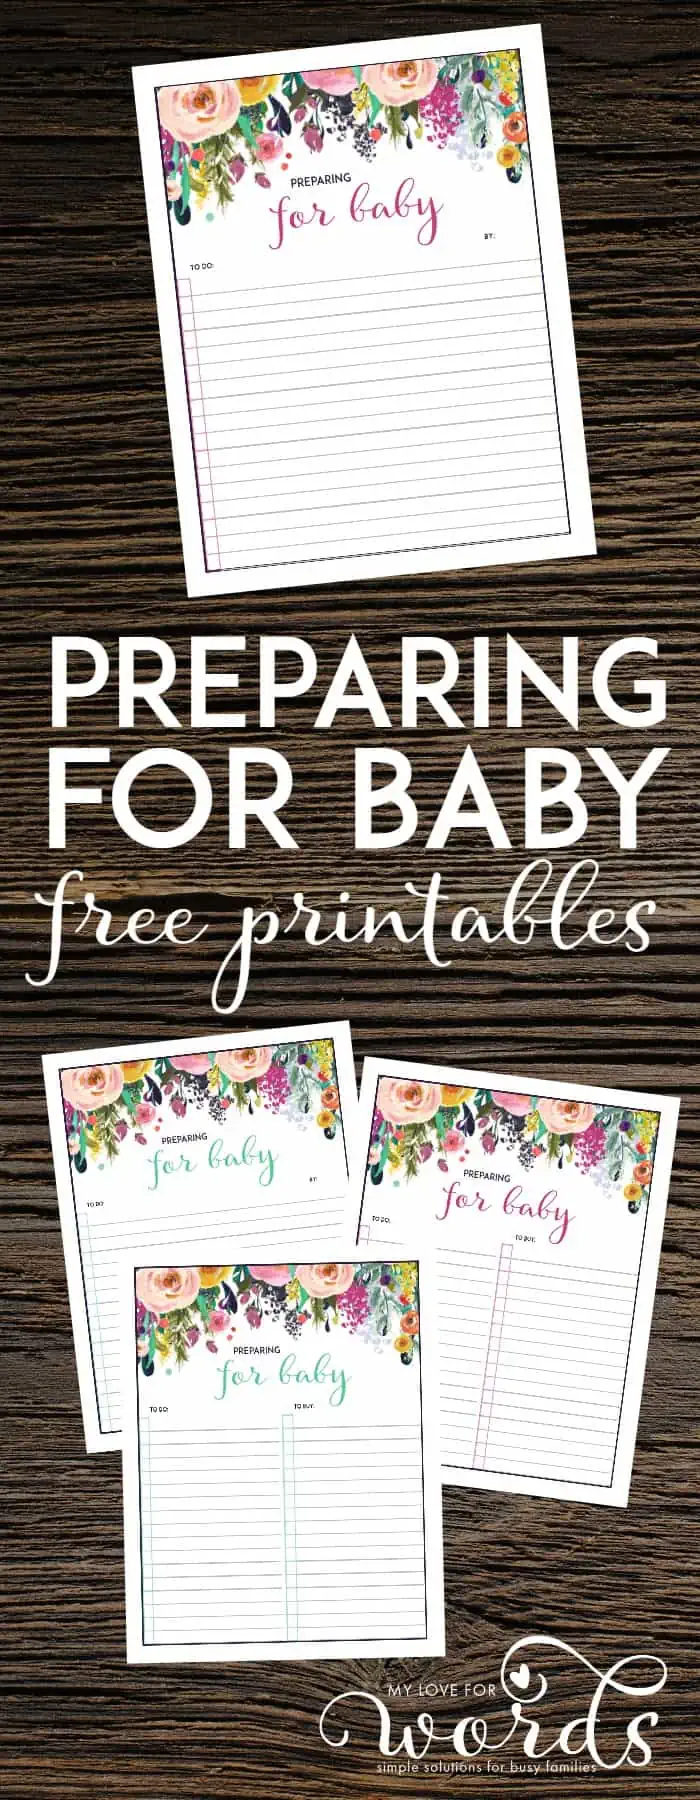 I love these preparing for baby free printables! Such a great way to keep track of what you need to do and buy before baby's due date and arrival.